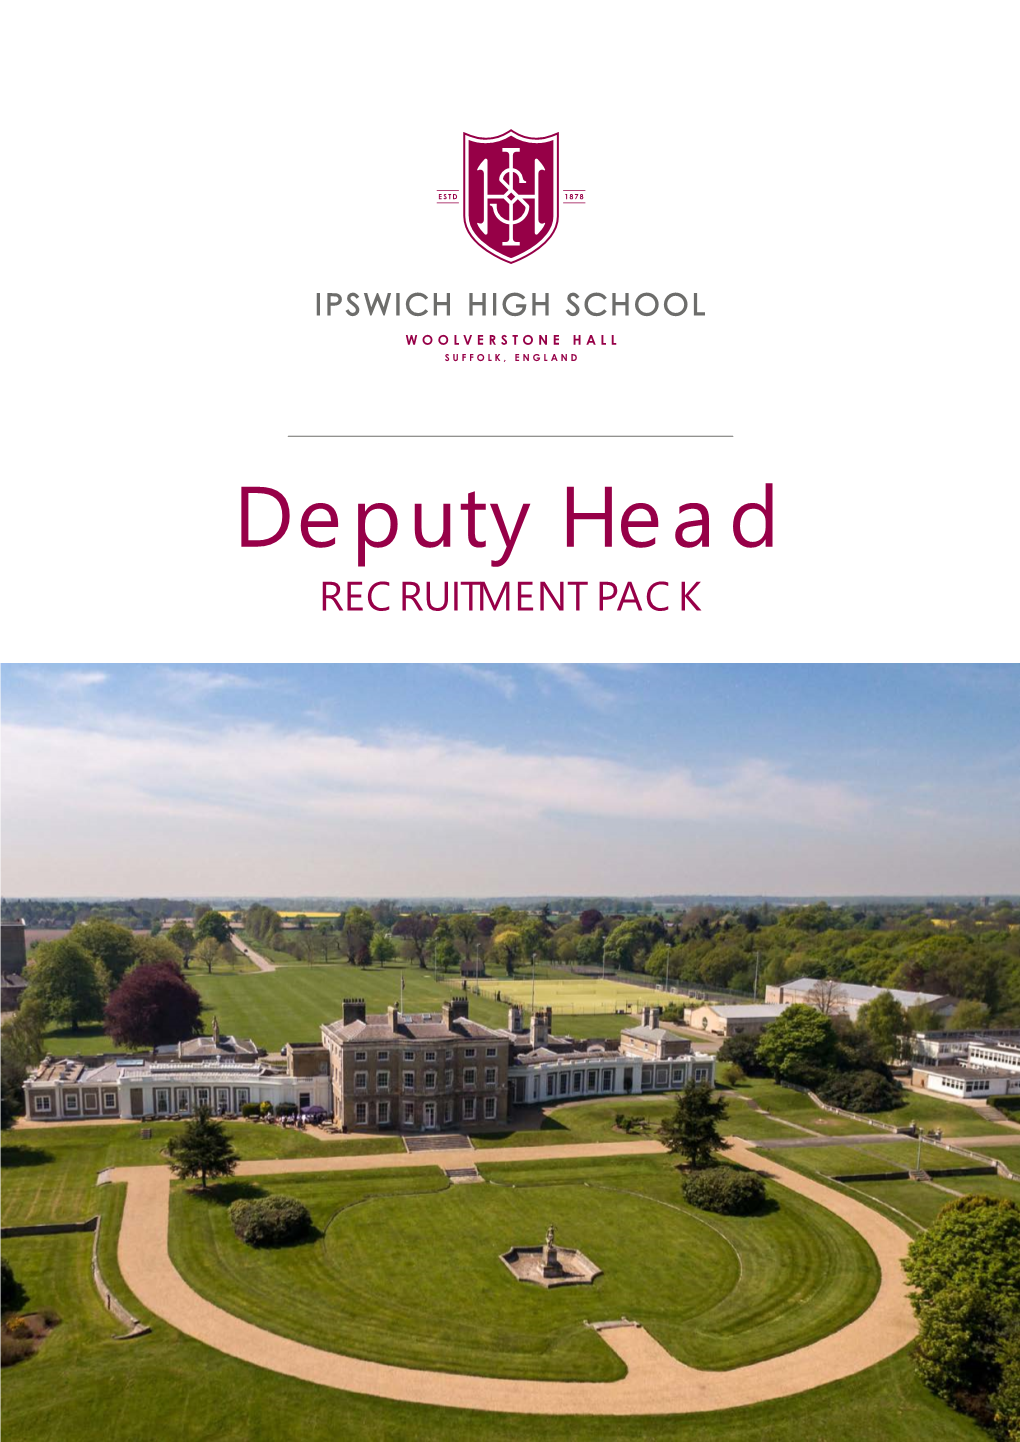 Deputy Head RECRUITMENT PACK Dear Sir/Madam, I Would Like to Start by Thanking You for Your Interest in Working at Ipswich High School and with Our Pupils